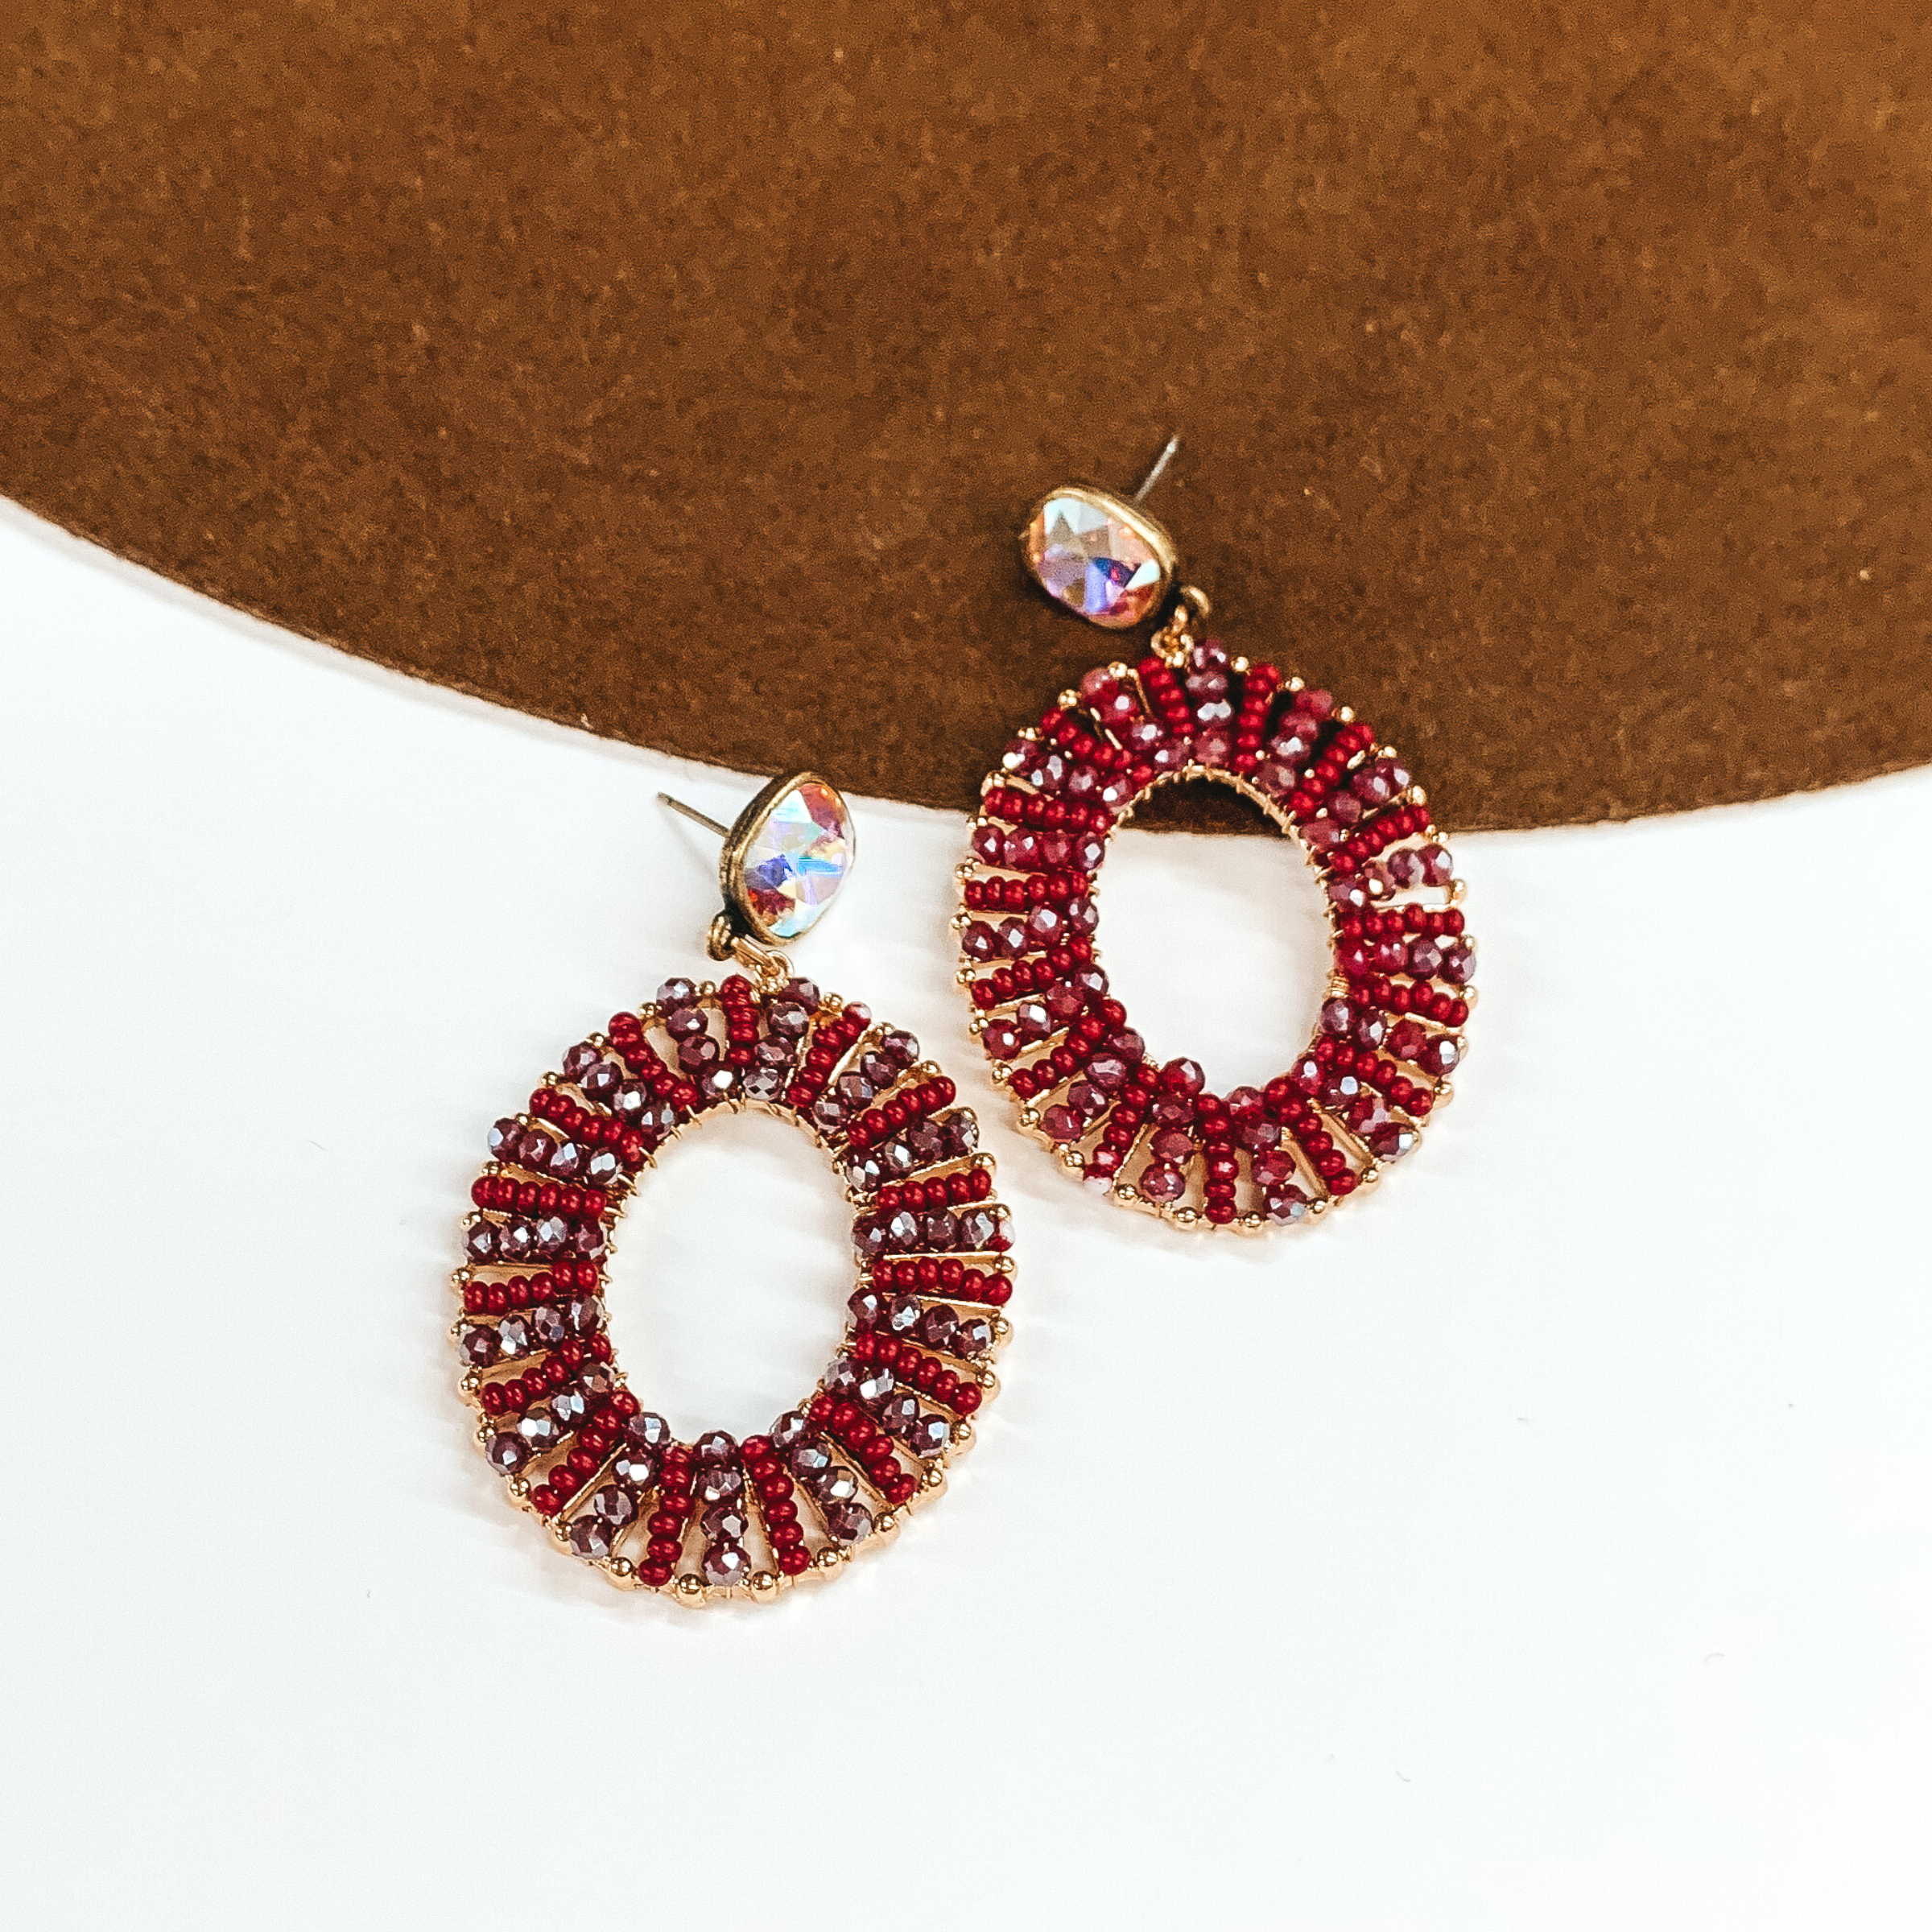 Pair of open oval, beaded earrings. These earrings include ab cushion cut crystal stud earrings and the oval pendant has burgundy beads. These earrings are pictured laying partially on a brown hat brim on a white background. 